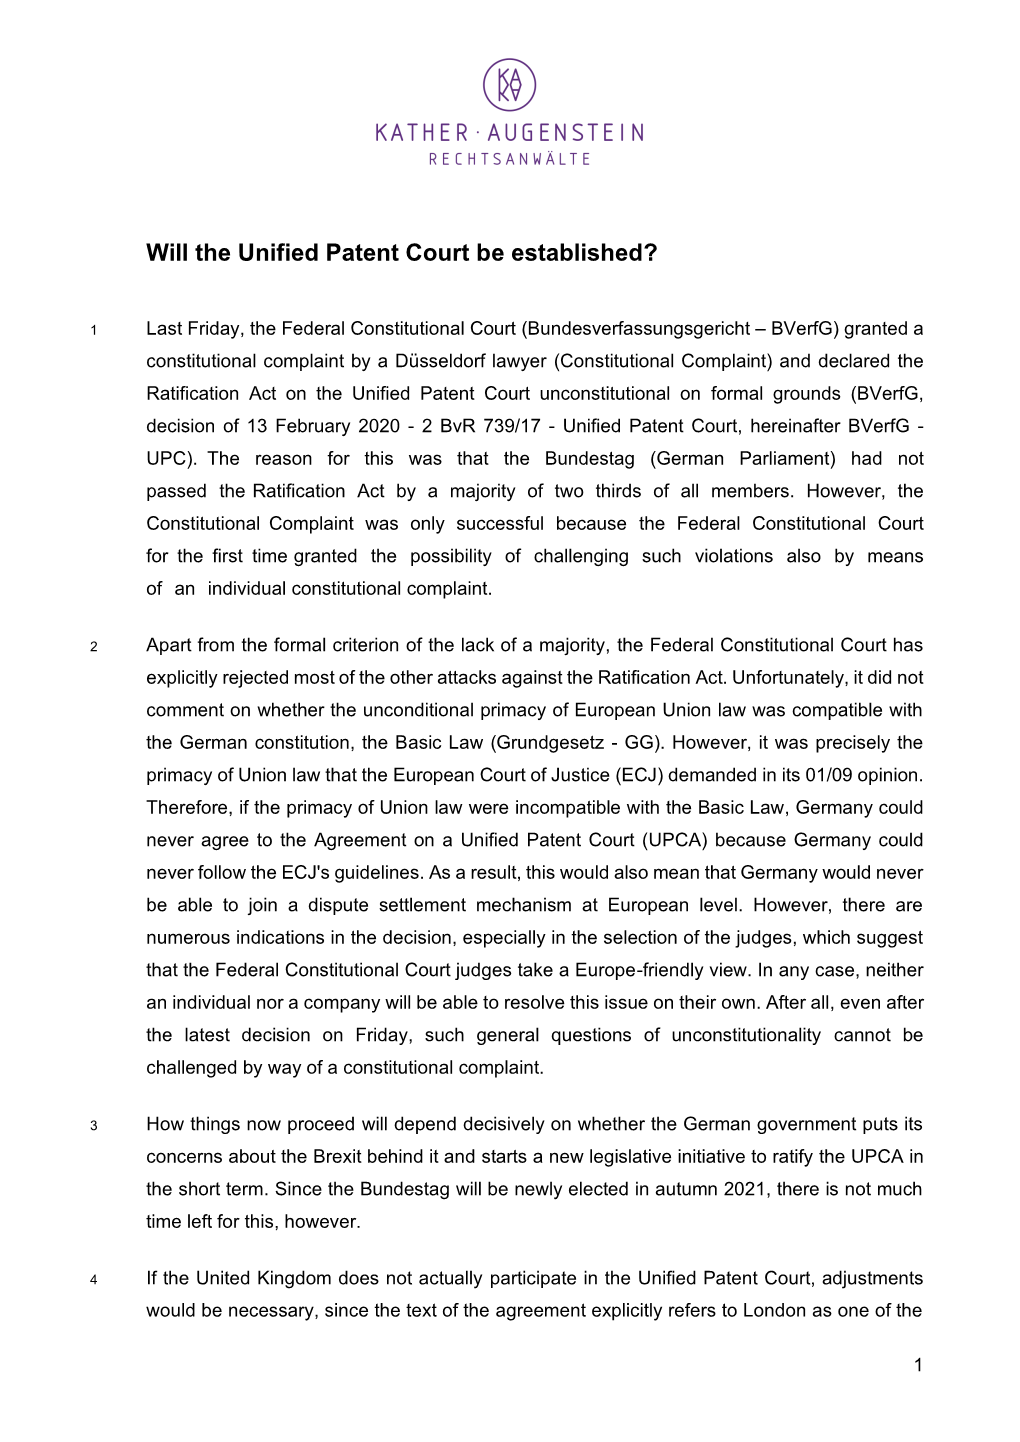 Will the Unified Patent Court Be Established?